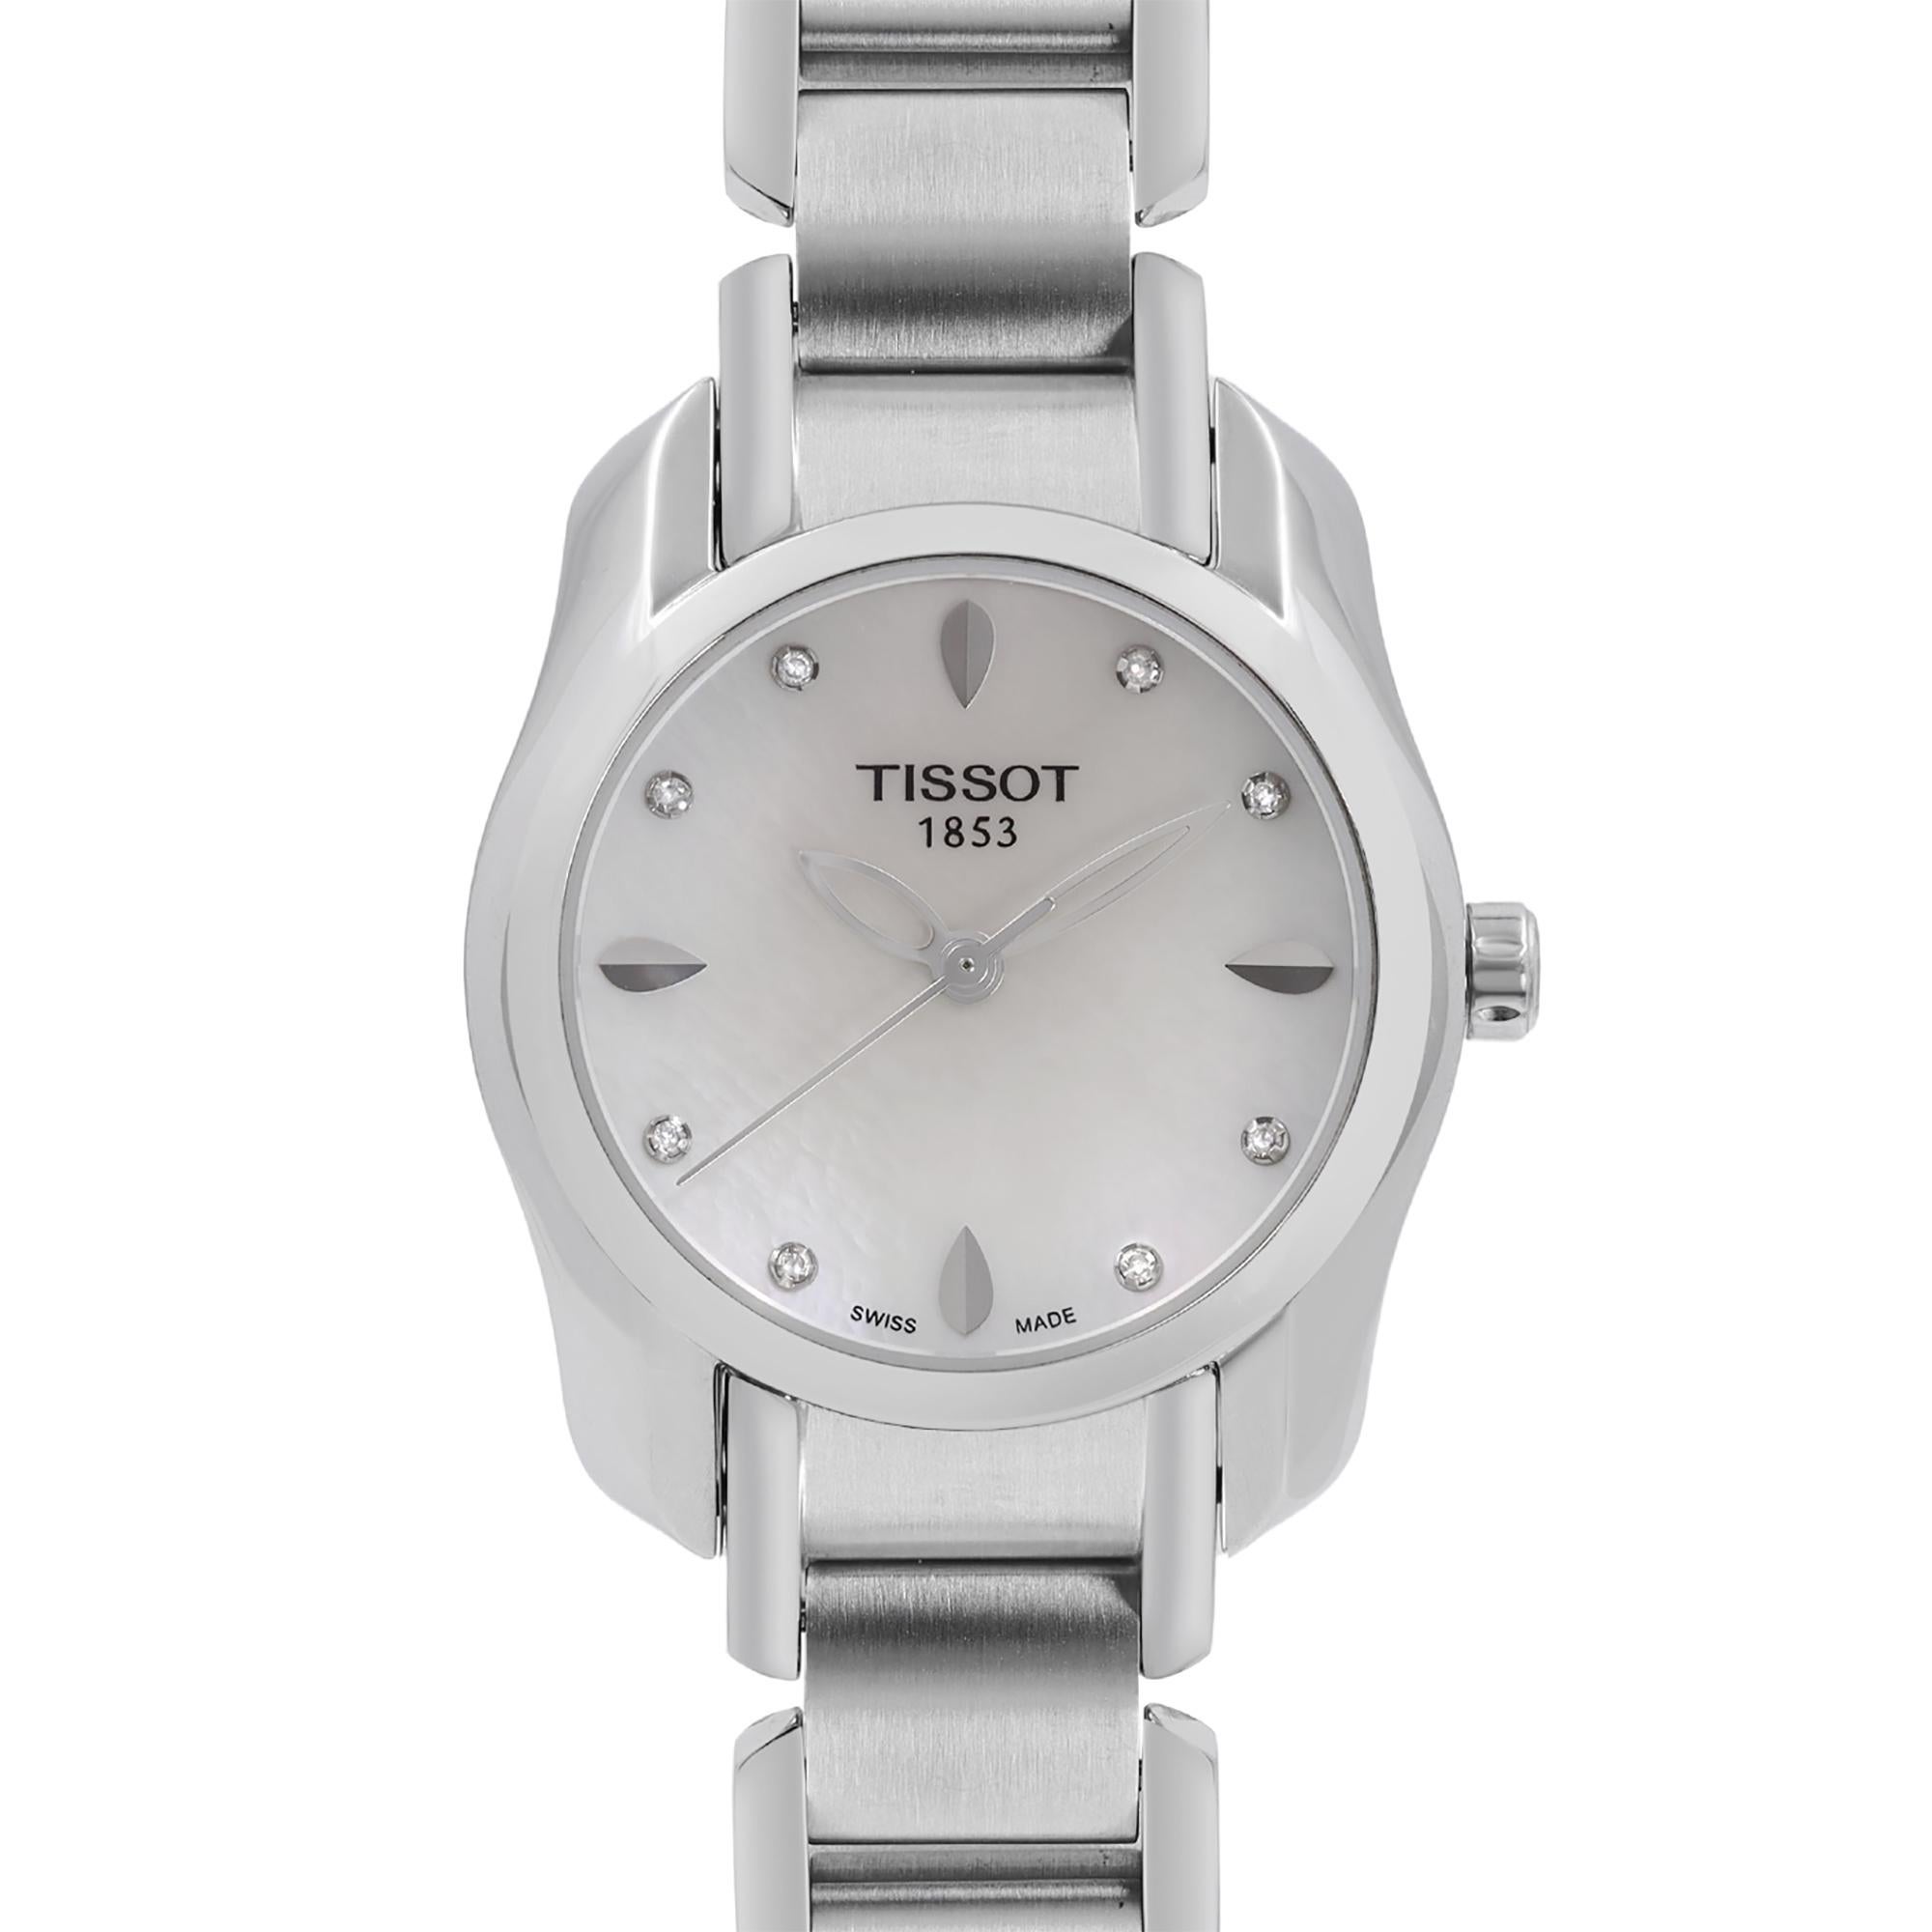 Display Model Tissot T-Wave Ladies Watch T023.210.11.116.00. This Beautiful Timepiece is Powered by a Quartz (Battery) Movement and Features: Stainless Steel Case and Bracelet. Mother Of Pearl Dial with Silver-Tone Skeleton Hands, and Diamond Hour